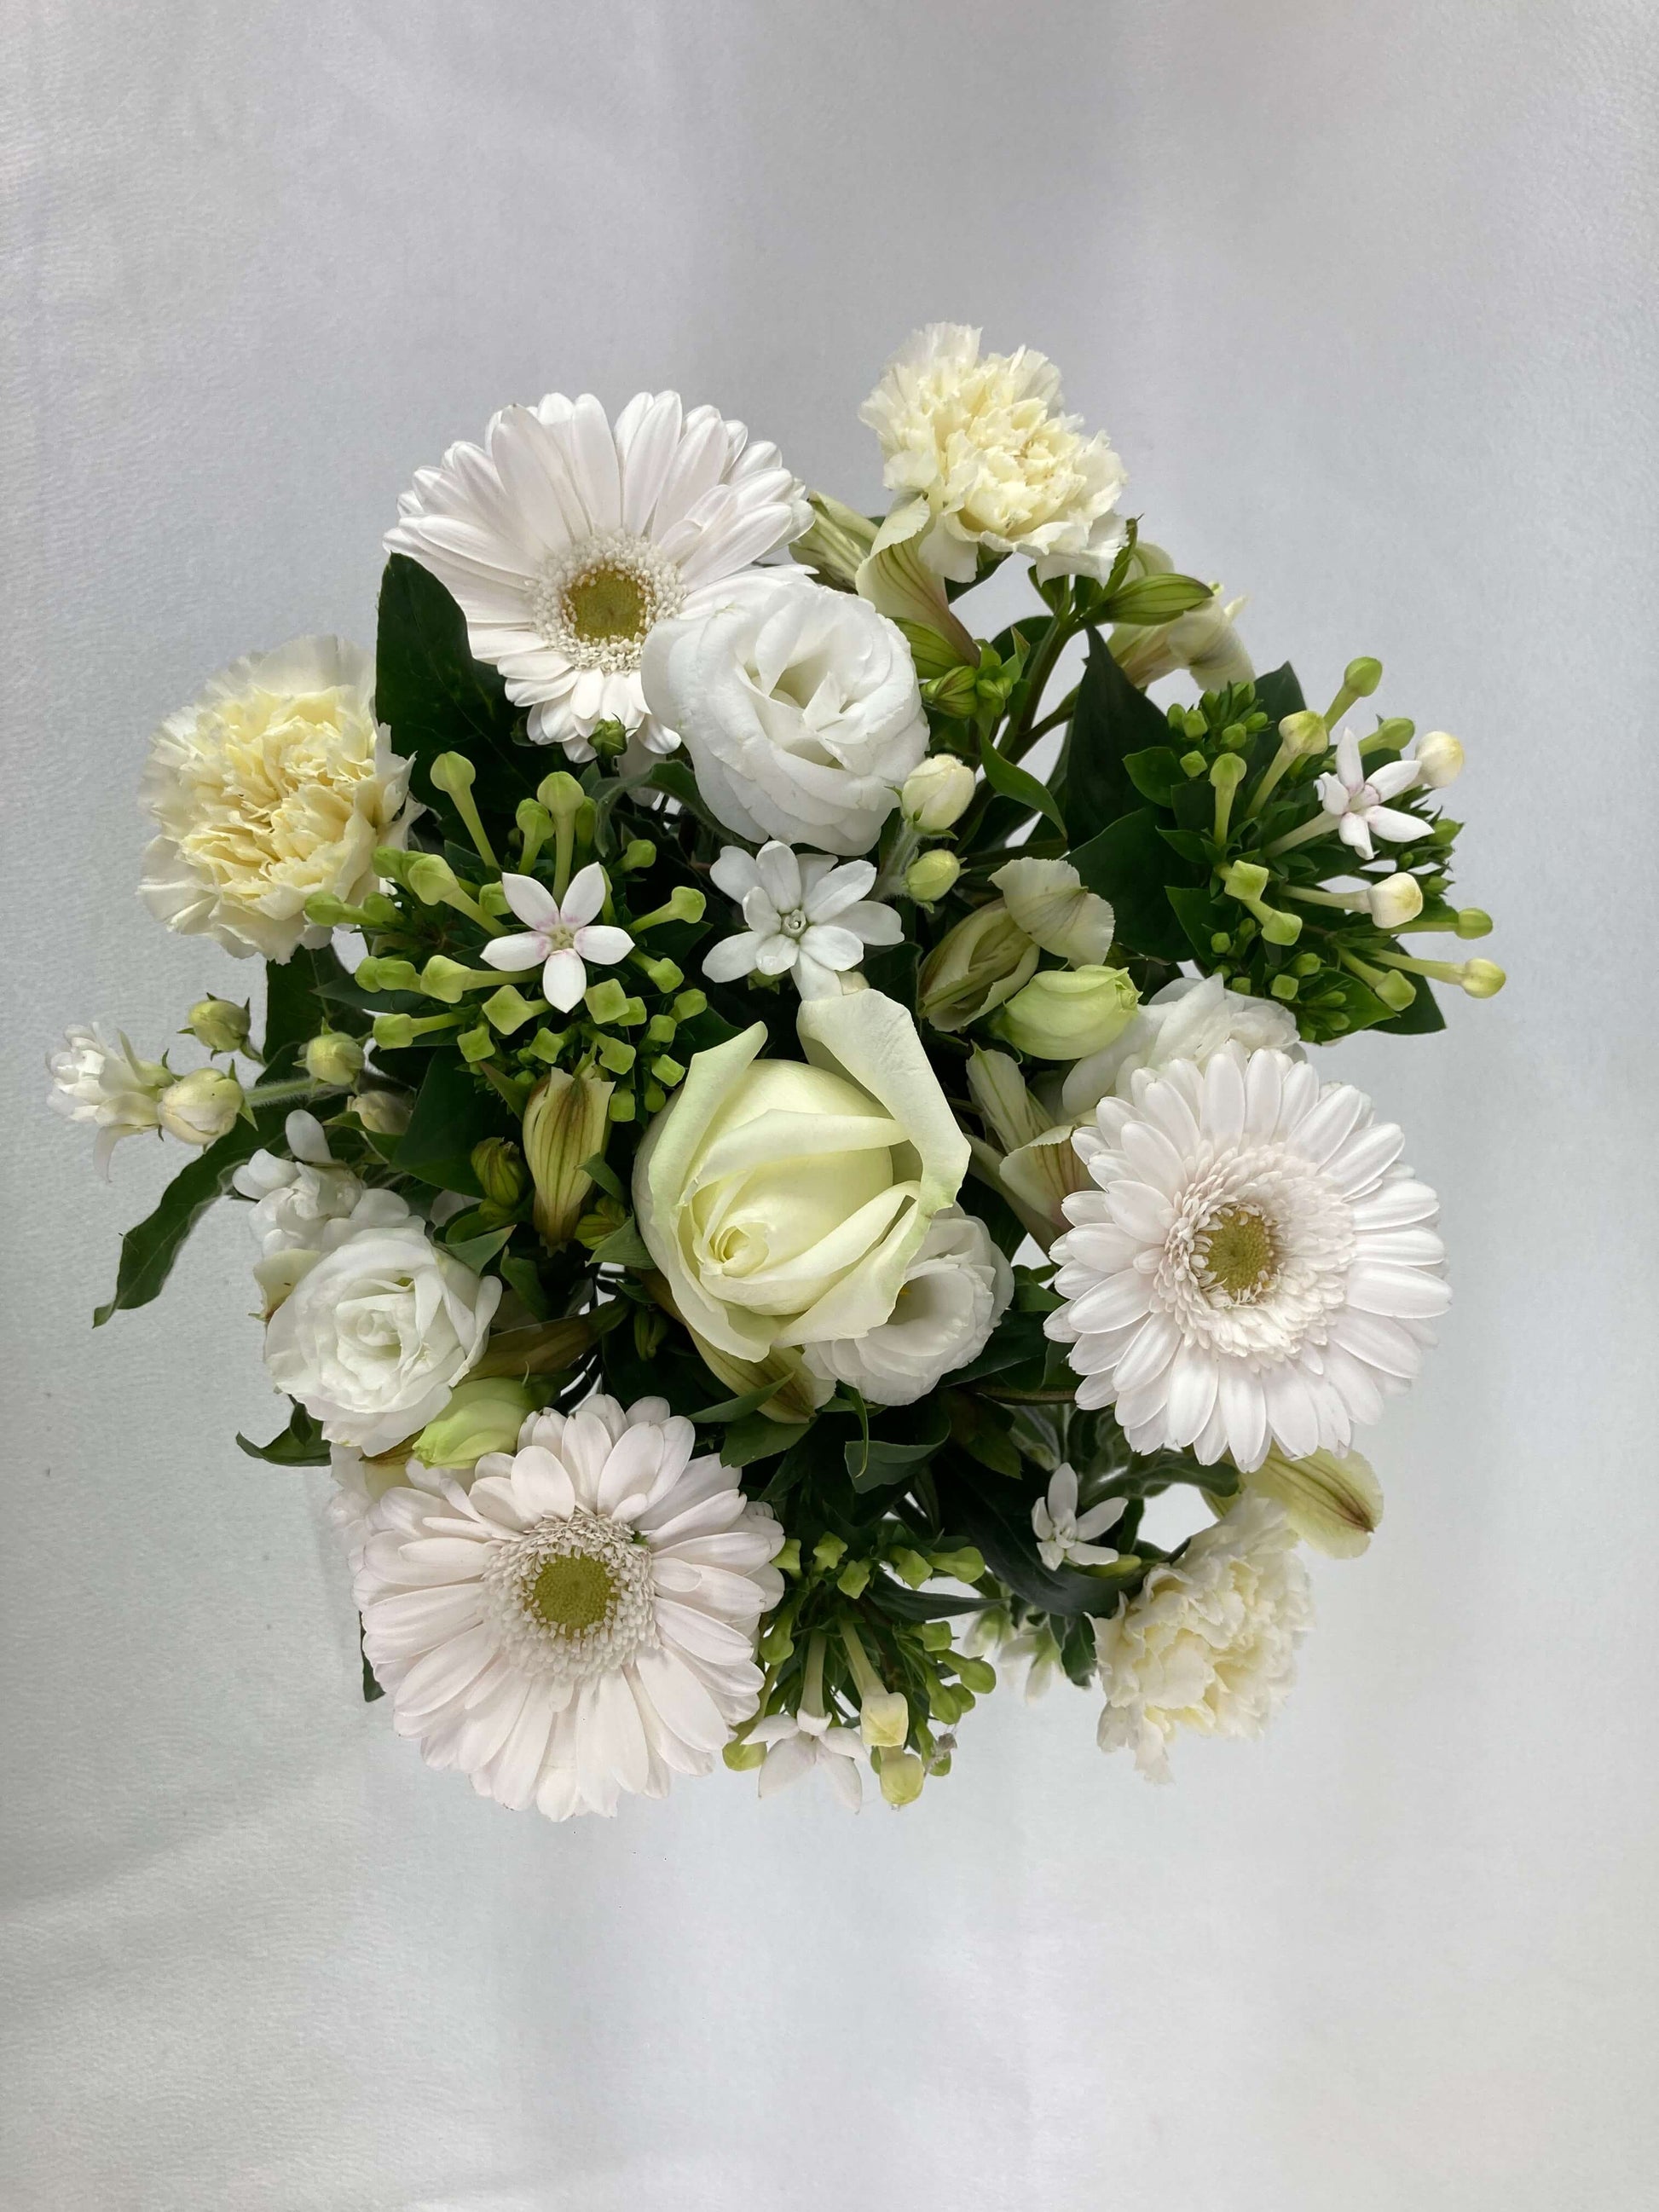 A white and green posy from above.